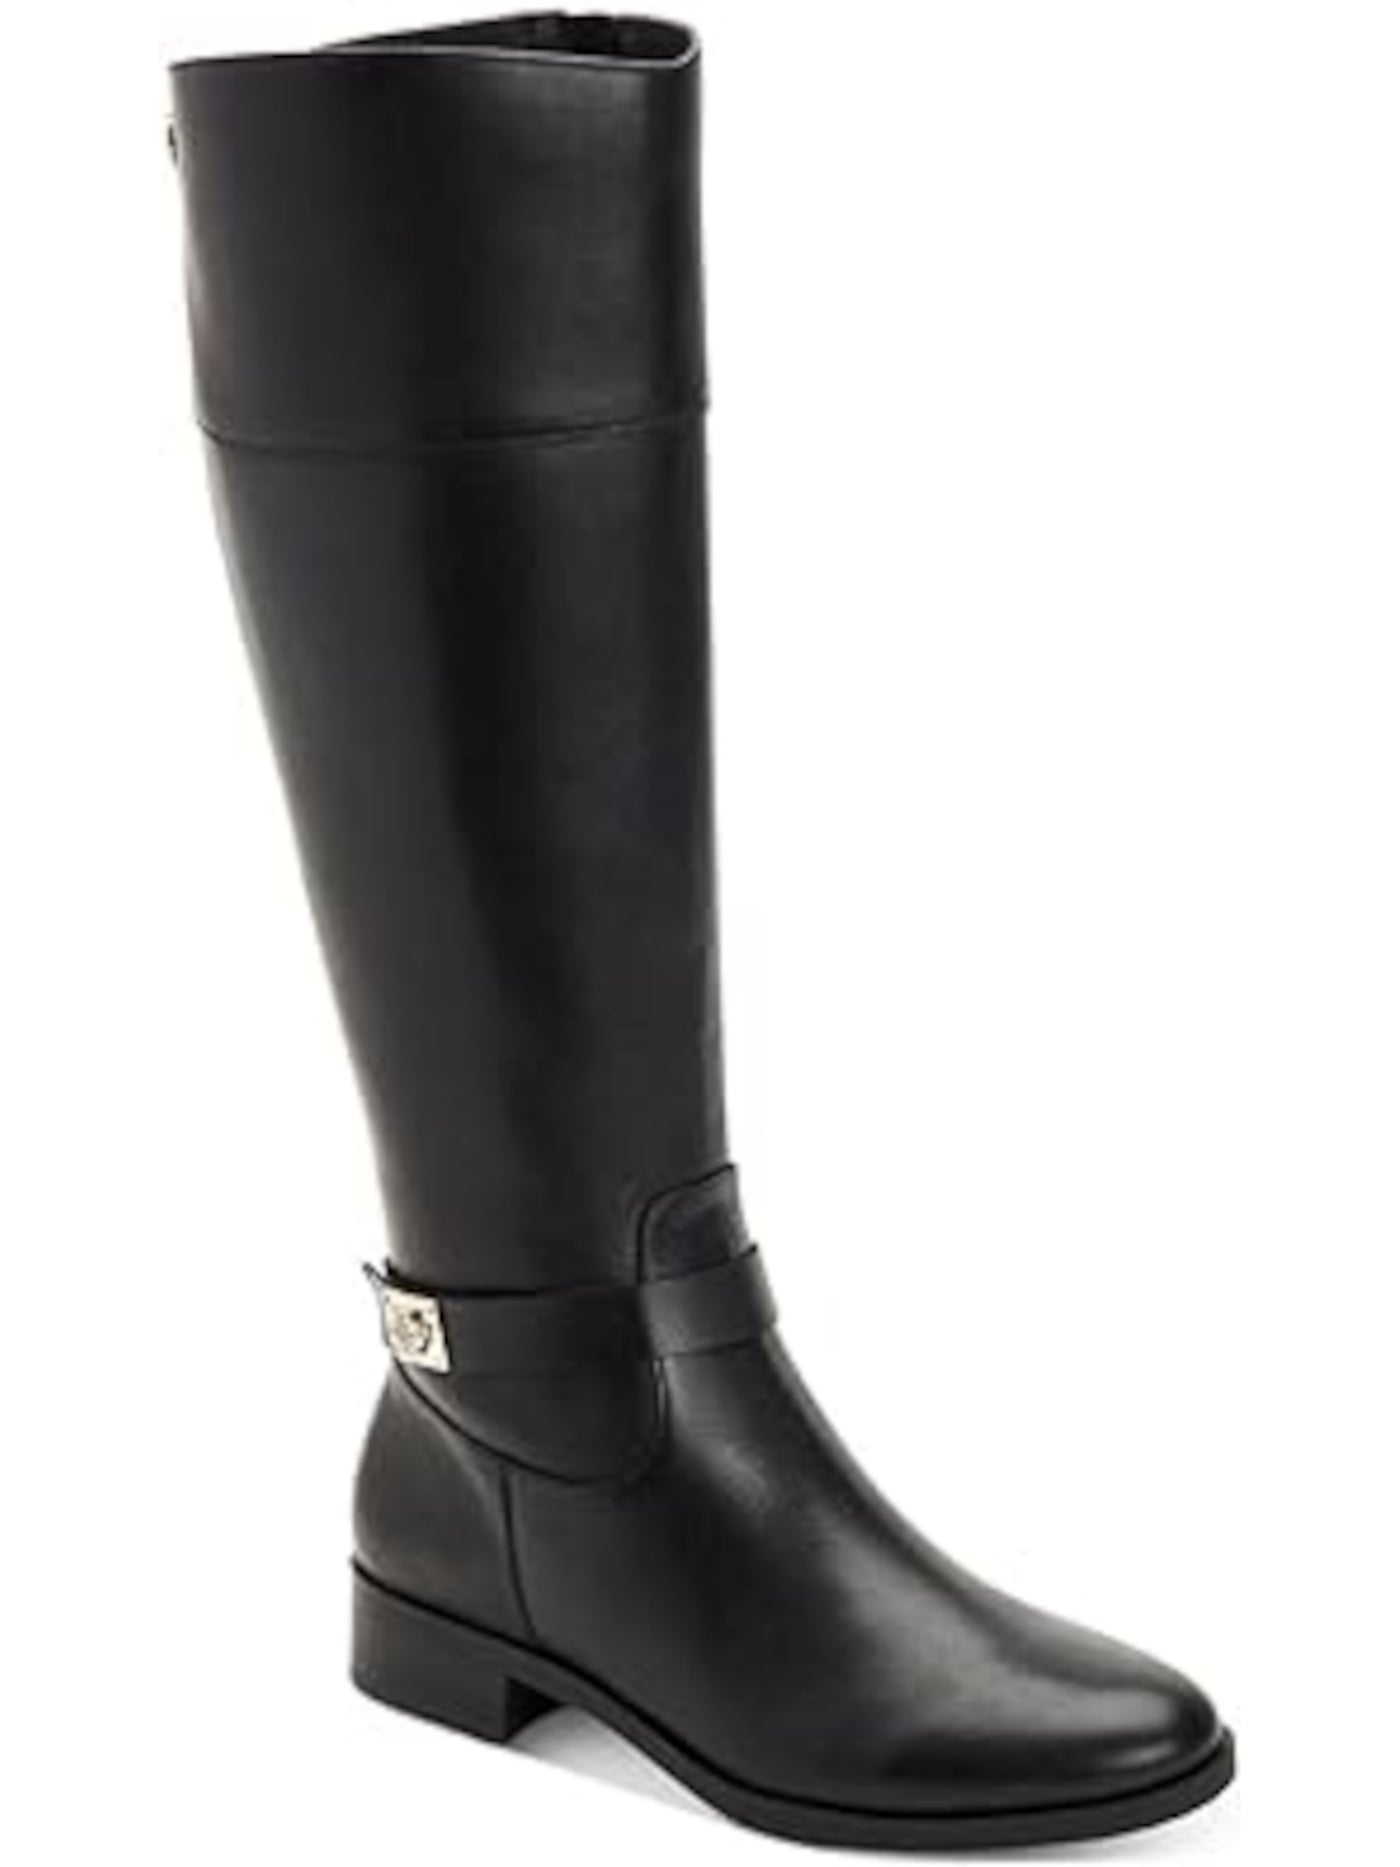 CHARTER CLUB Womens Black Buckle Accent Johannes Round Toe Zip-Up Riding Boot 9.5 M